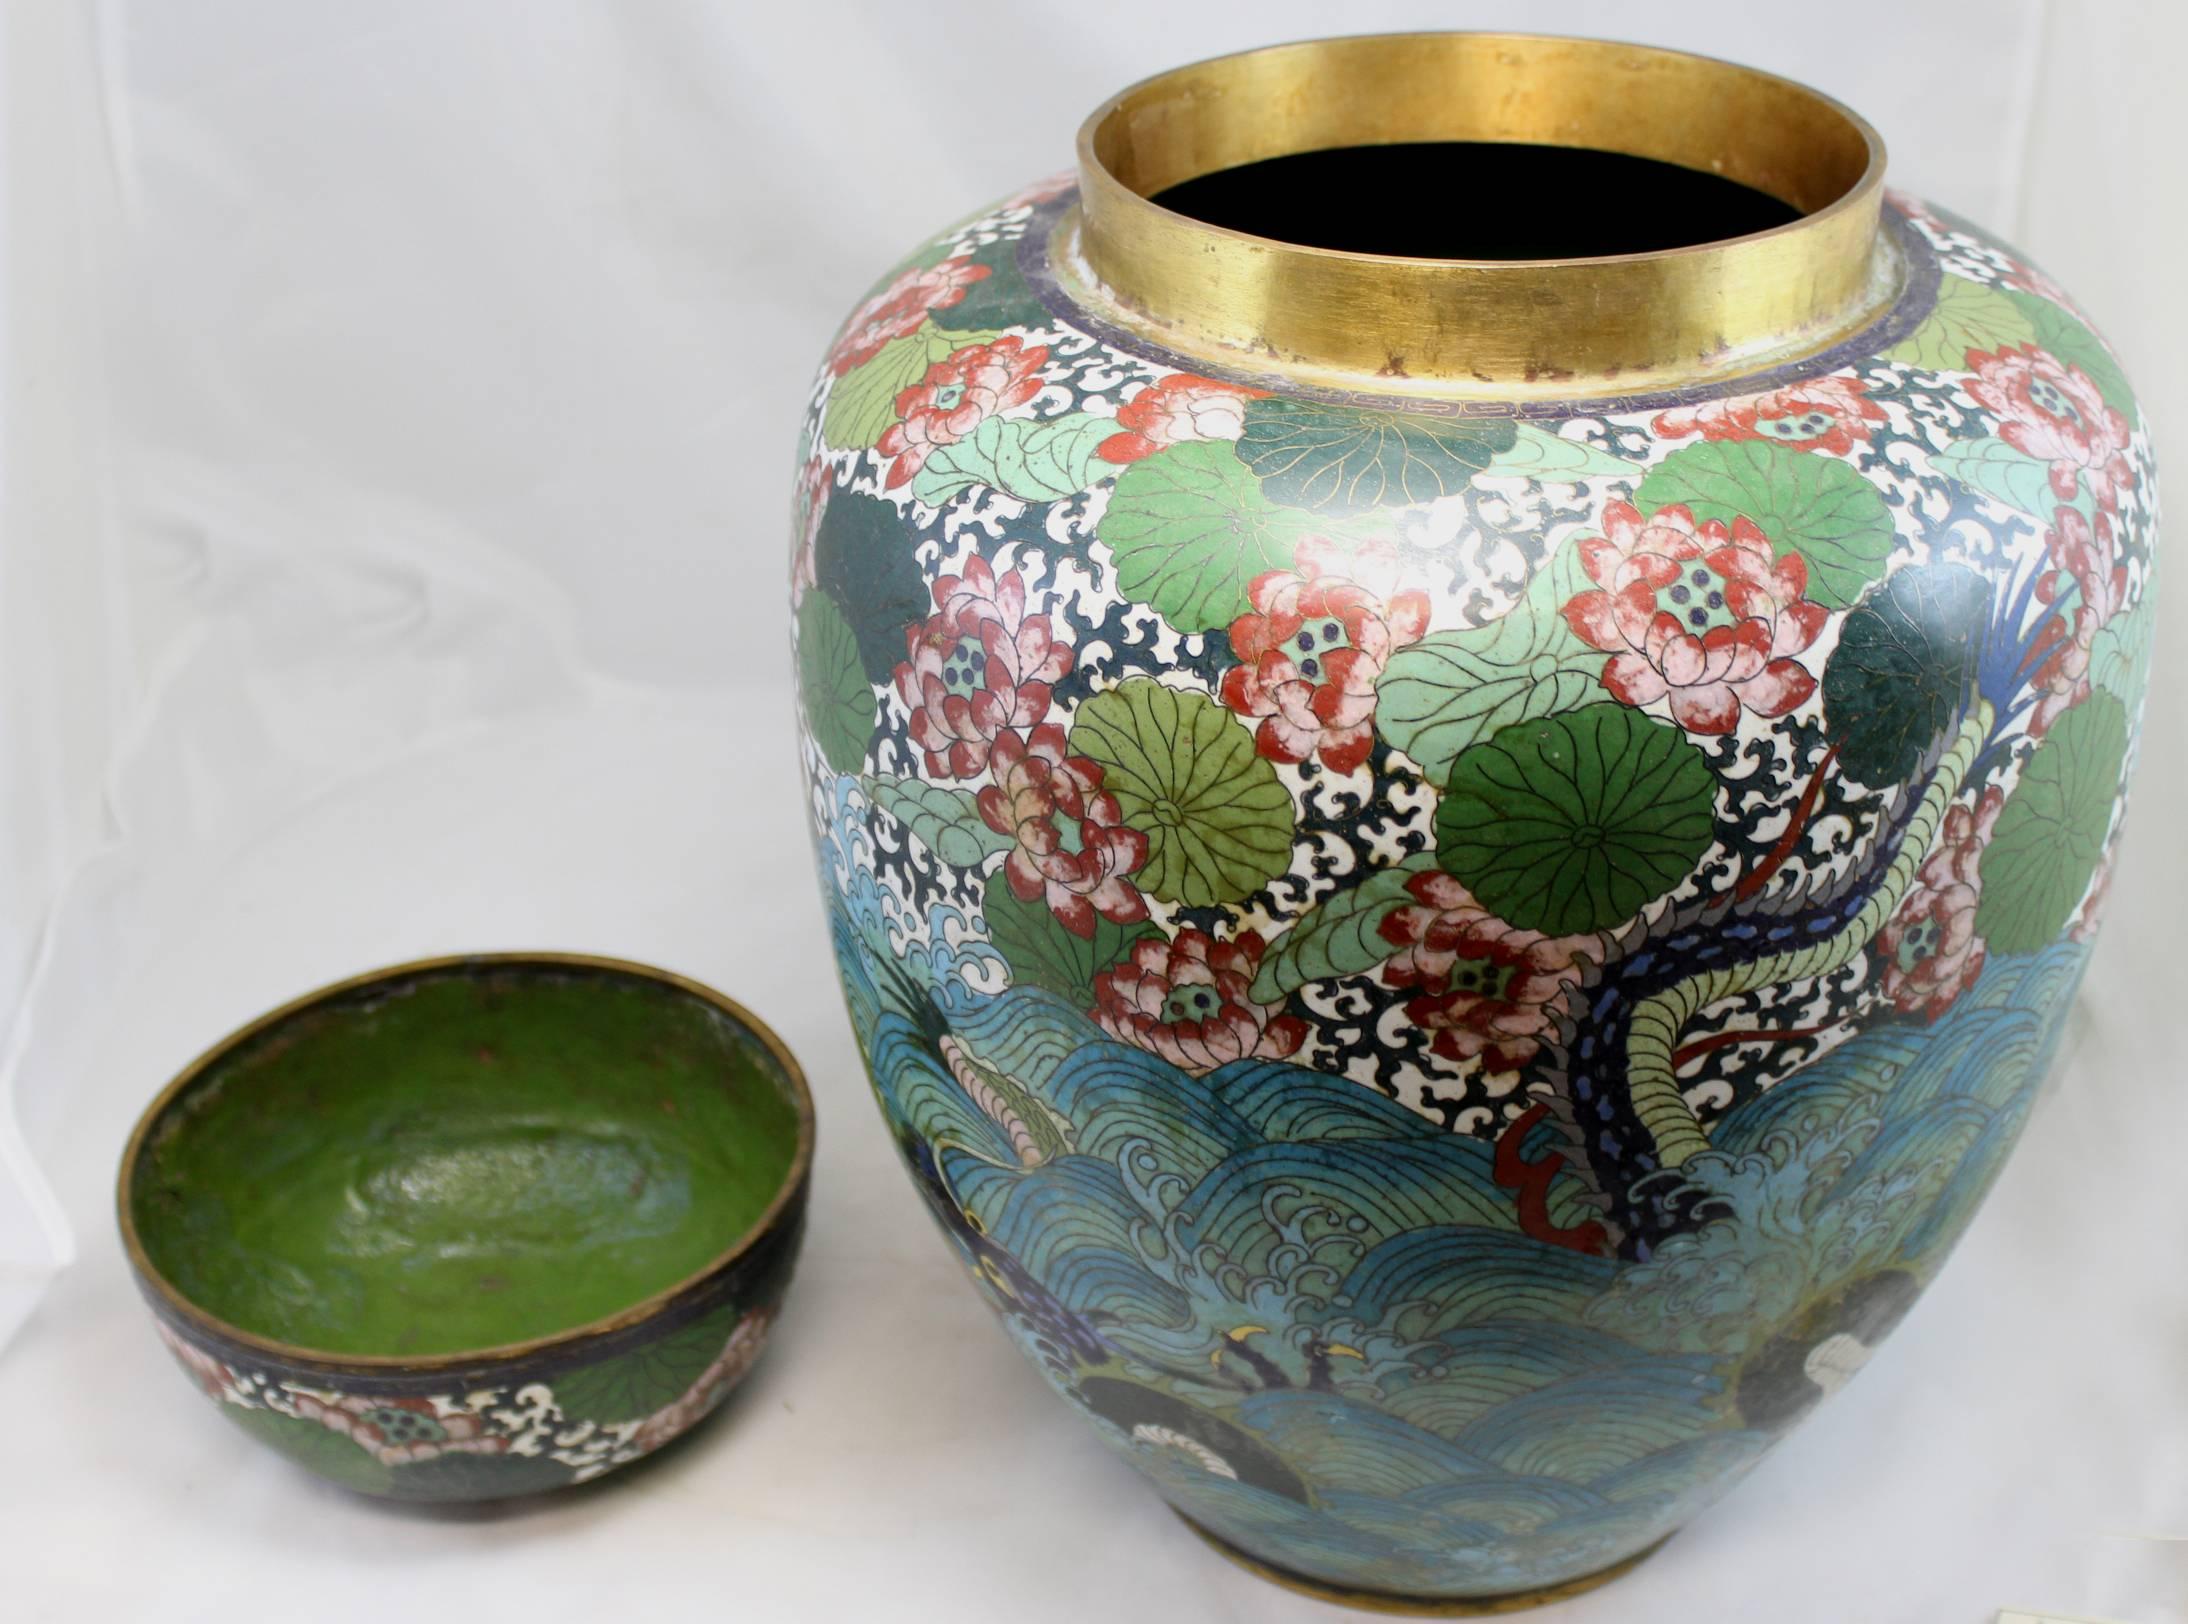 Bronze Large 19th Century Chinese Cloisonné Covered Jar or Urn with Sea Serpent